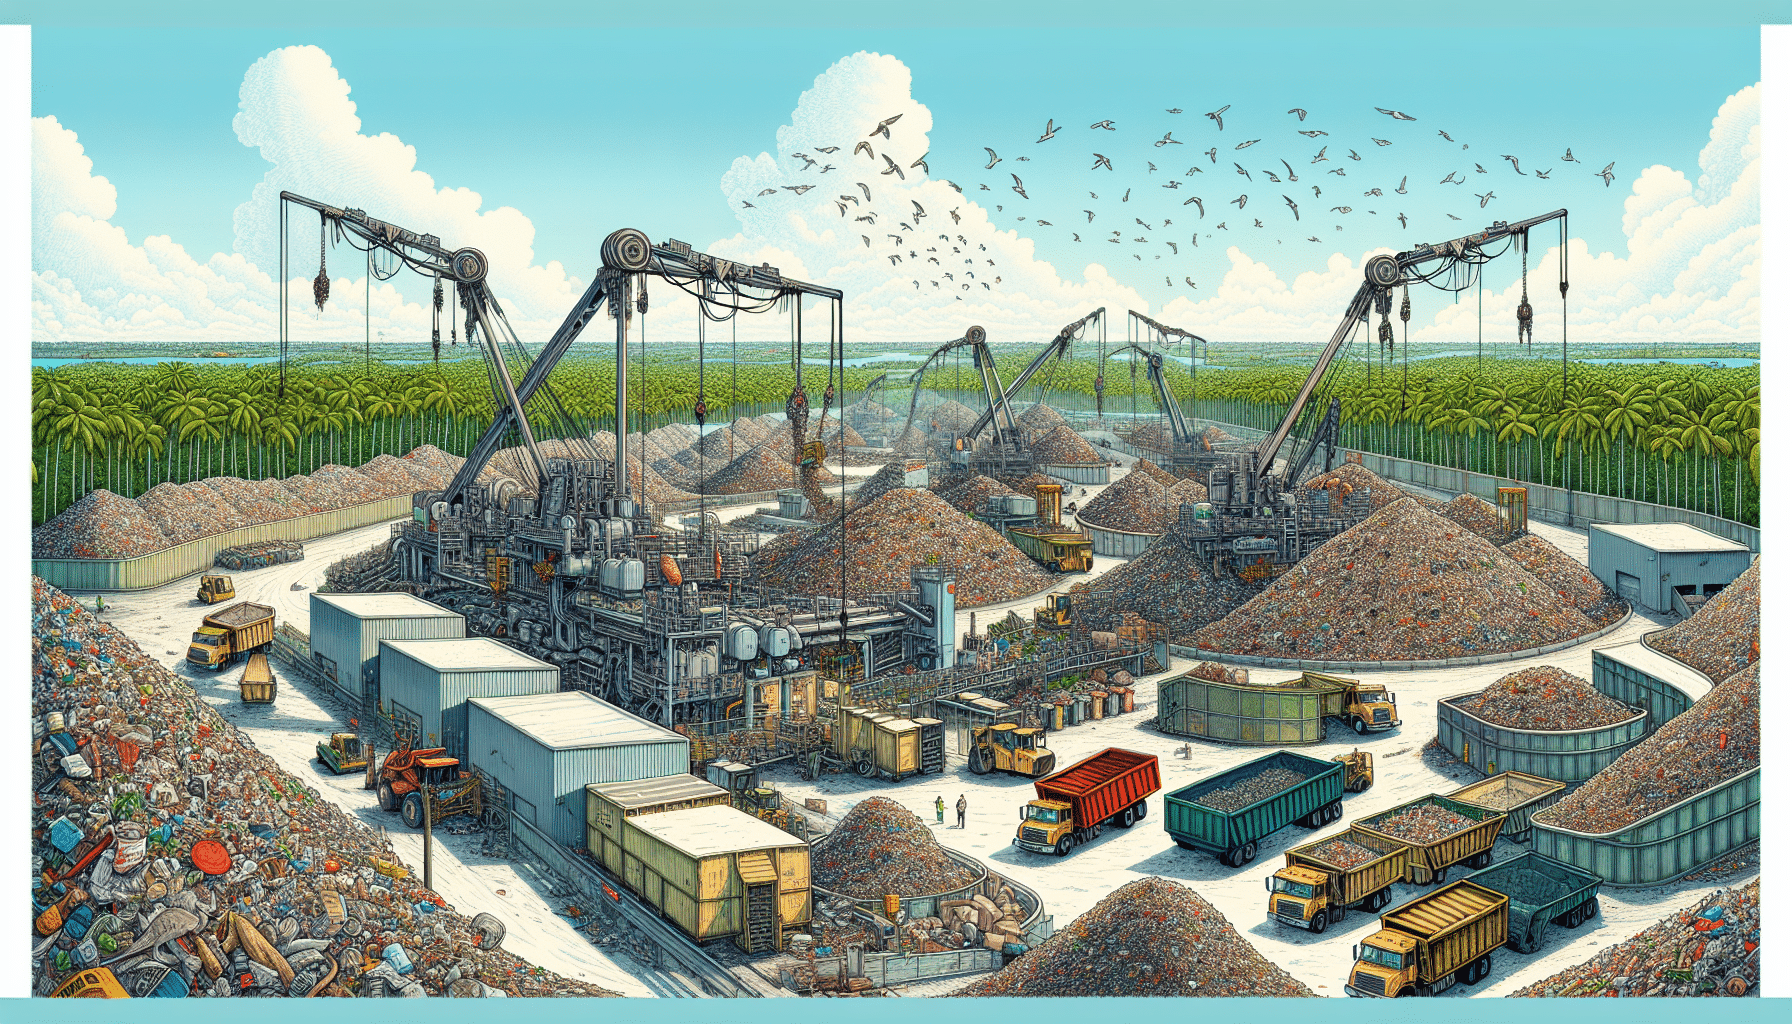 illustration of the north county landfill in west palm beach, fl